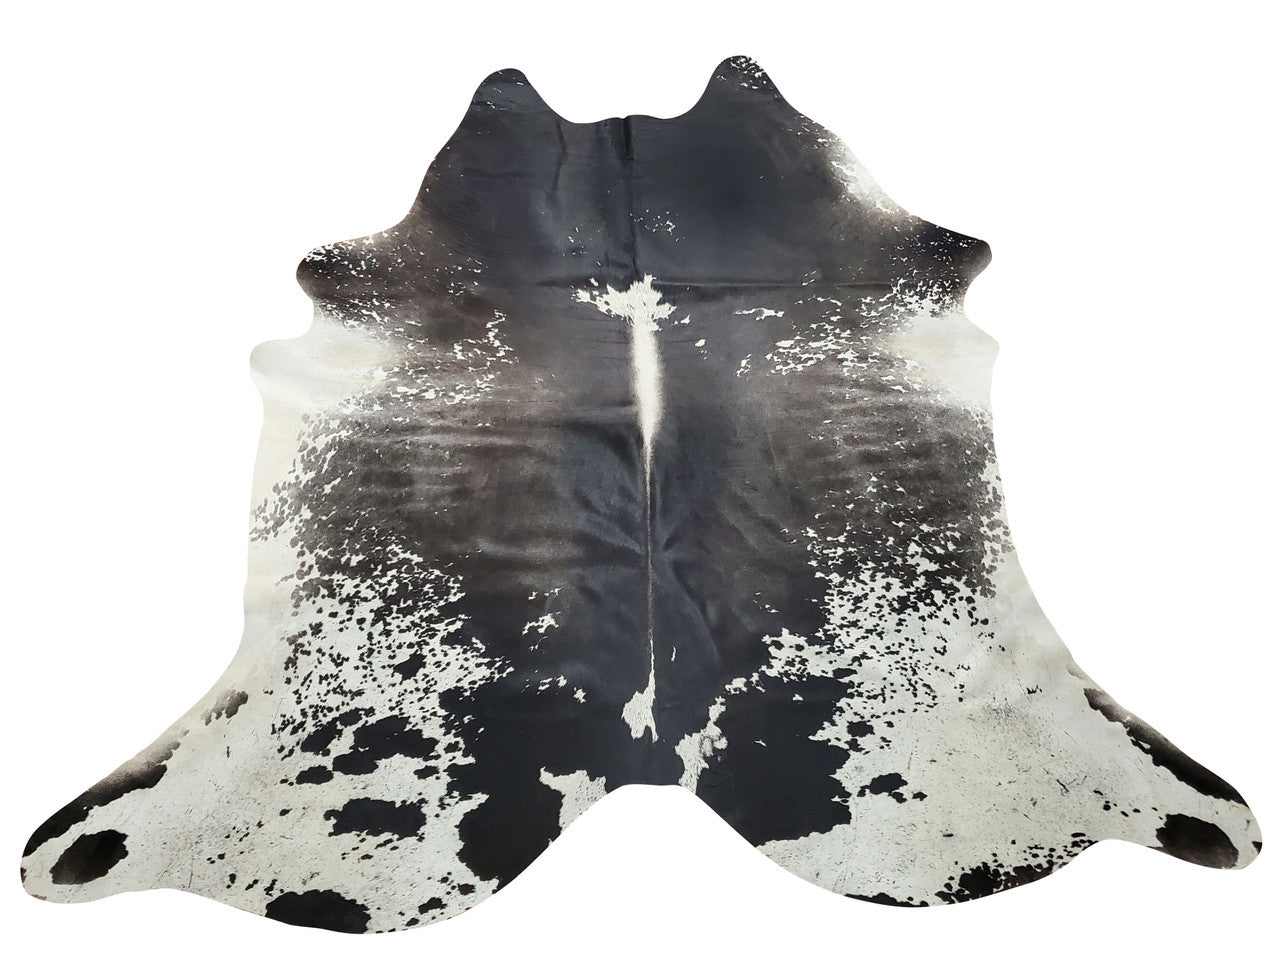 All of these grey Brazilian cowhide rug are hundred percent natural, we make sure each cow skin is hand-picked and carefully inspected. 